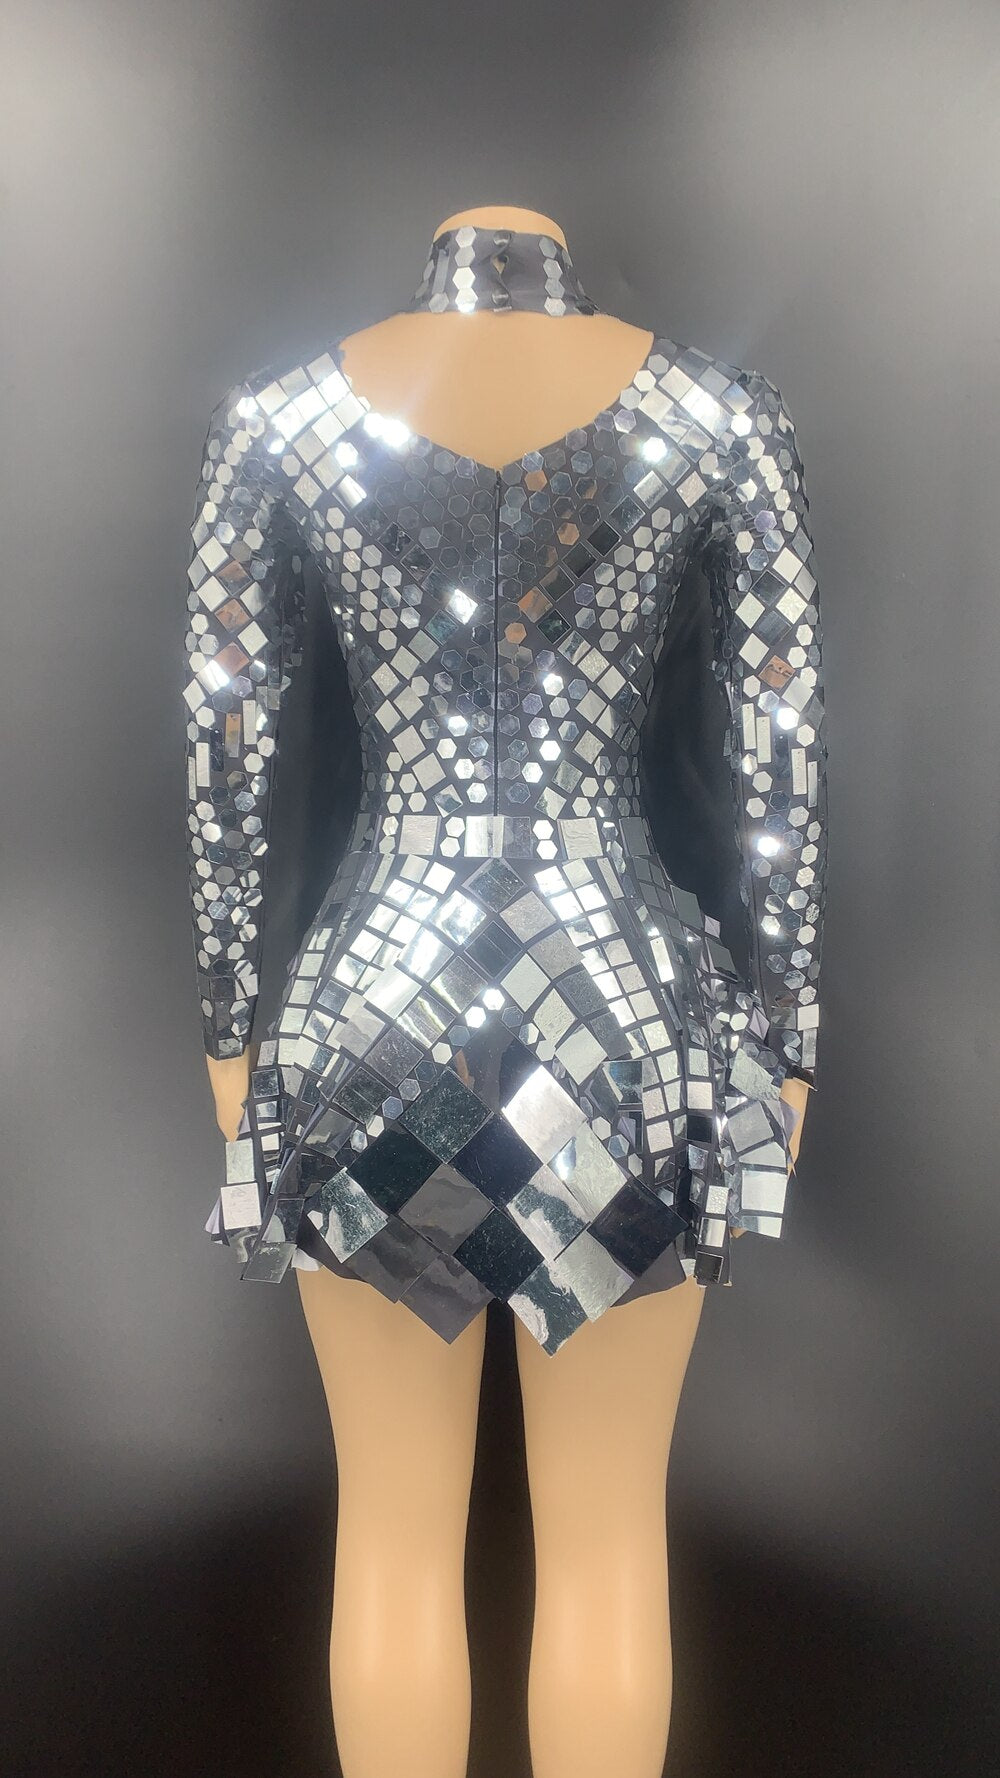 Sparkly Silver Sequin Short Dress Women Birthday Celebrate Mirror Outfit Bar Dance Costume Prom Party Dresses Singer Stage Wear